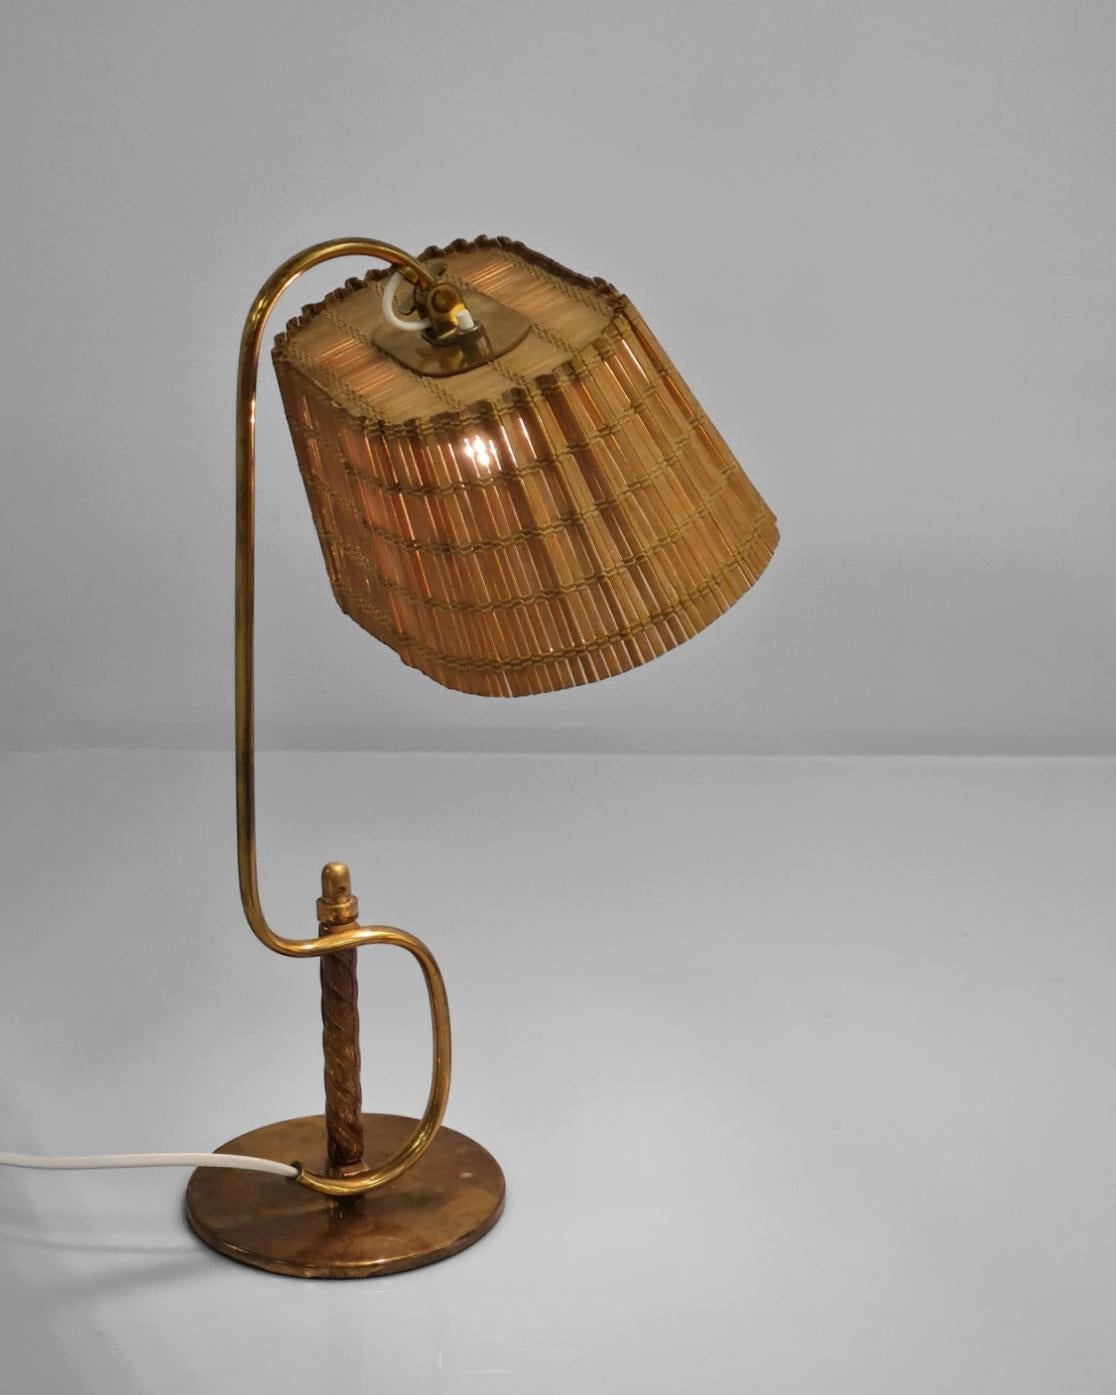 An unbelievably beautiful table lamp by the master of lightings design Paavo Tynell. This lamp is not only sleek, and very different than the other standard Tynell table lamps, it is very rare, even possibly unique with the brass handle, as it